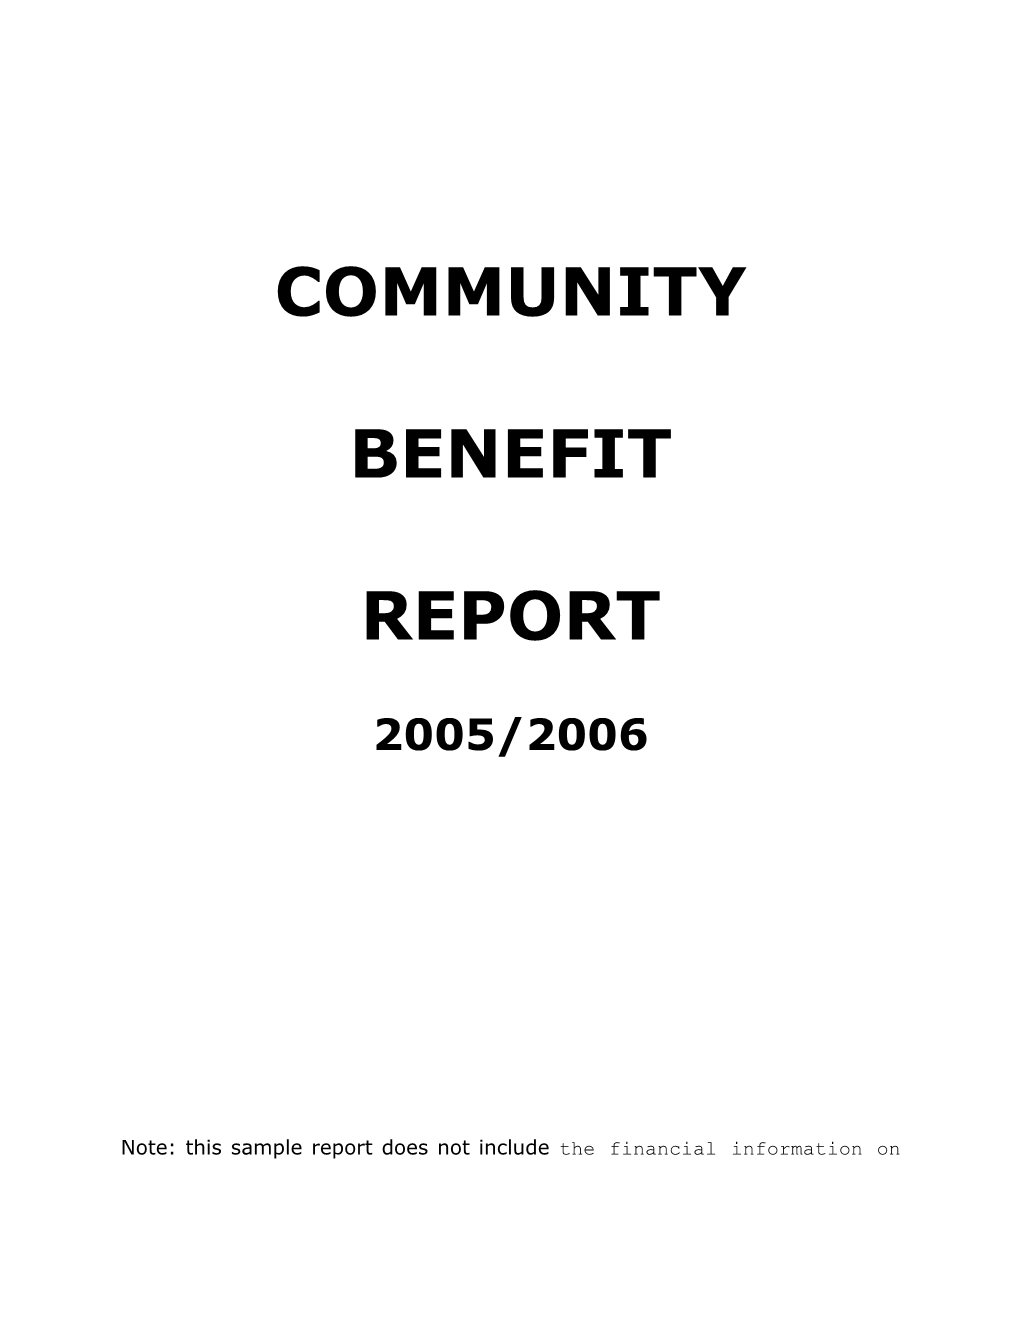 Note: This Sample Report Does Not Include the Financial Information on Uncompensated Care